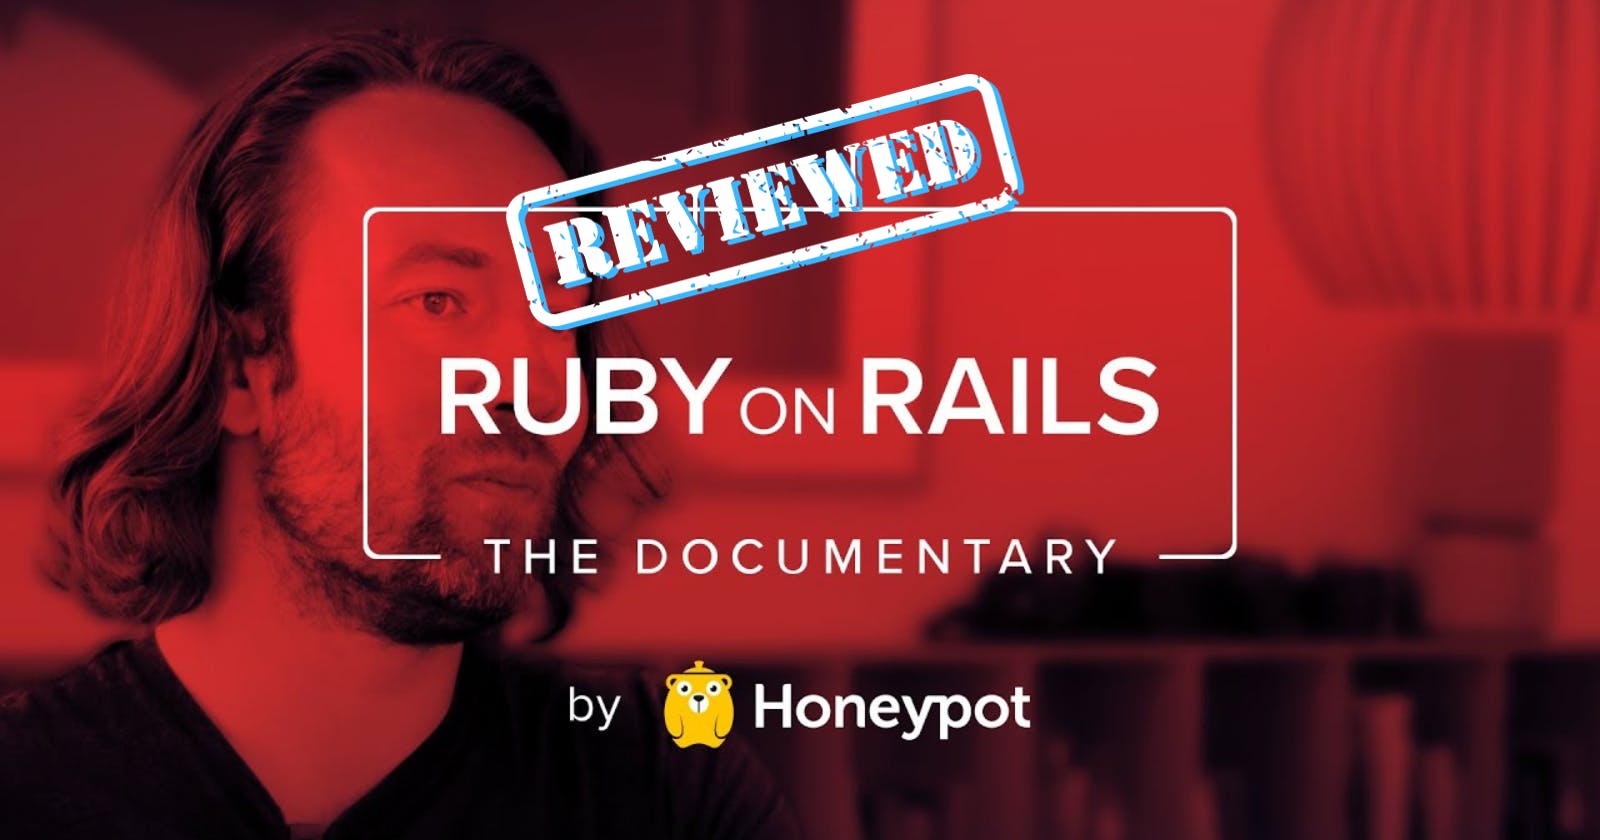 Review of Ruby on Rails Documentary by Honeypot